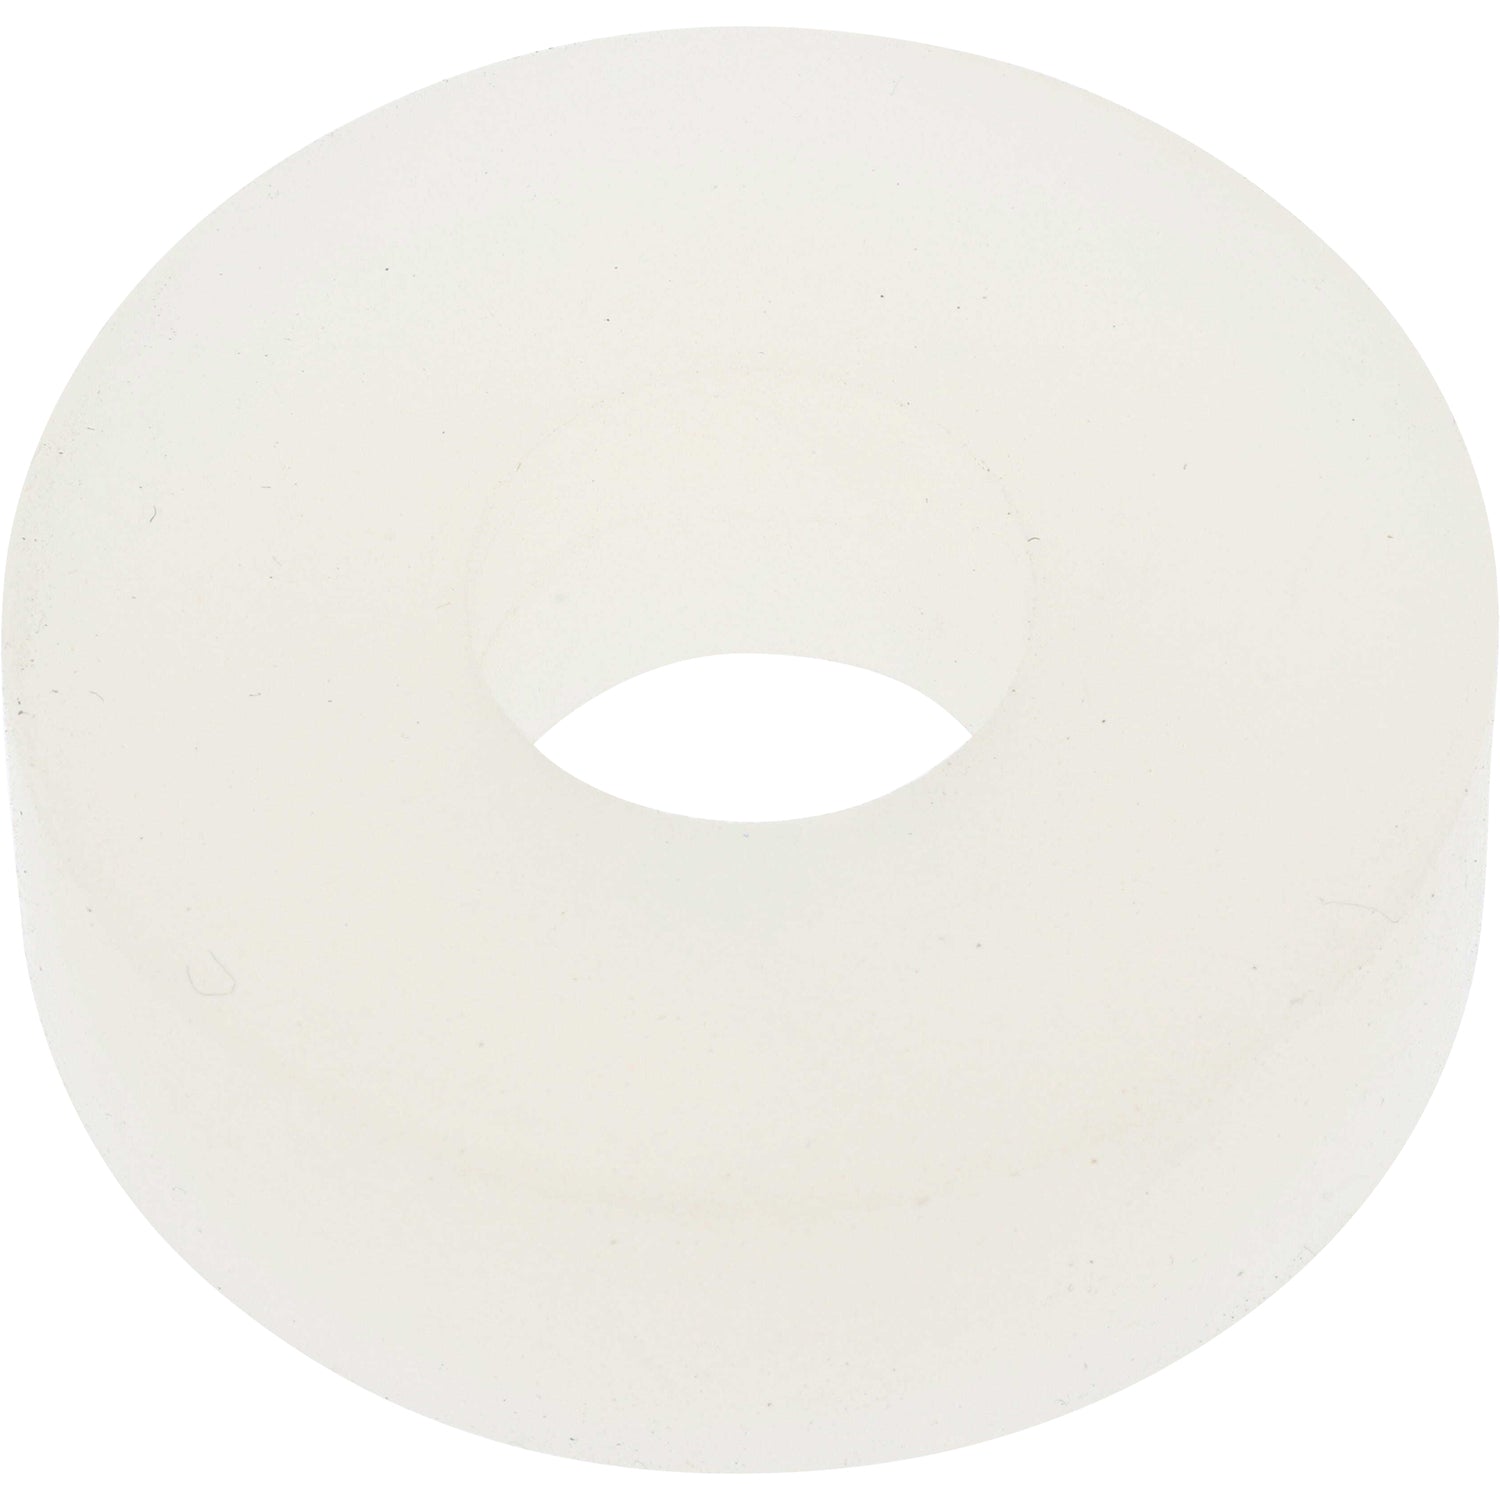 Off white, disk shaped rubber seal with hole in center on white background. P0-00152